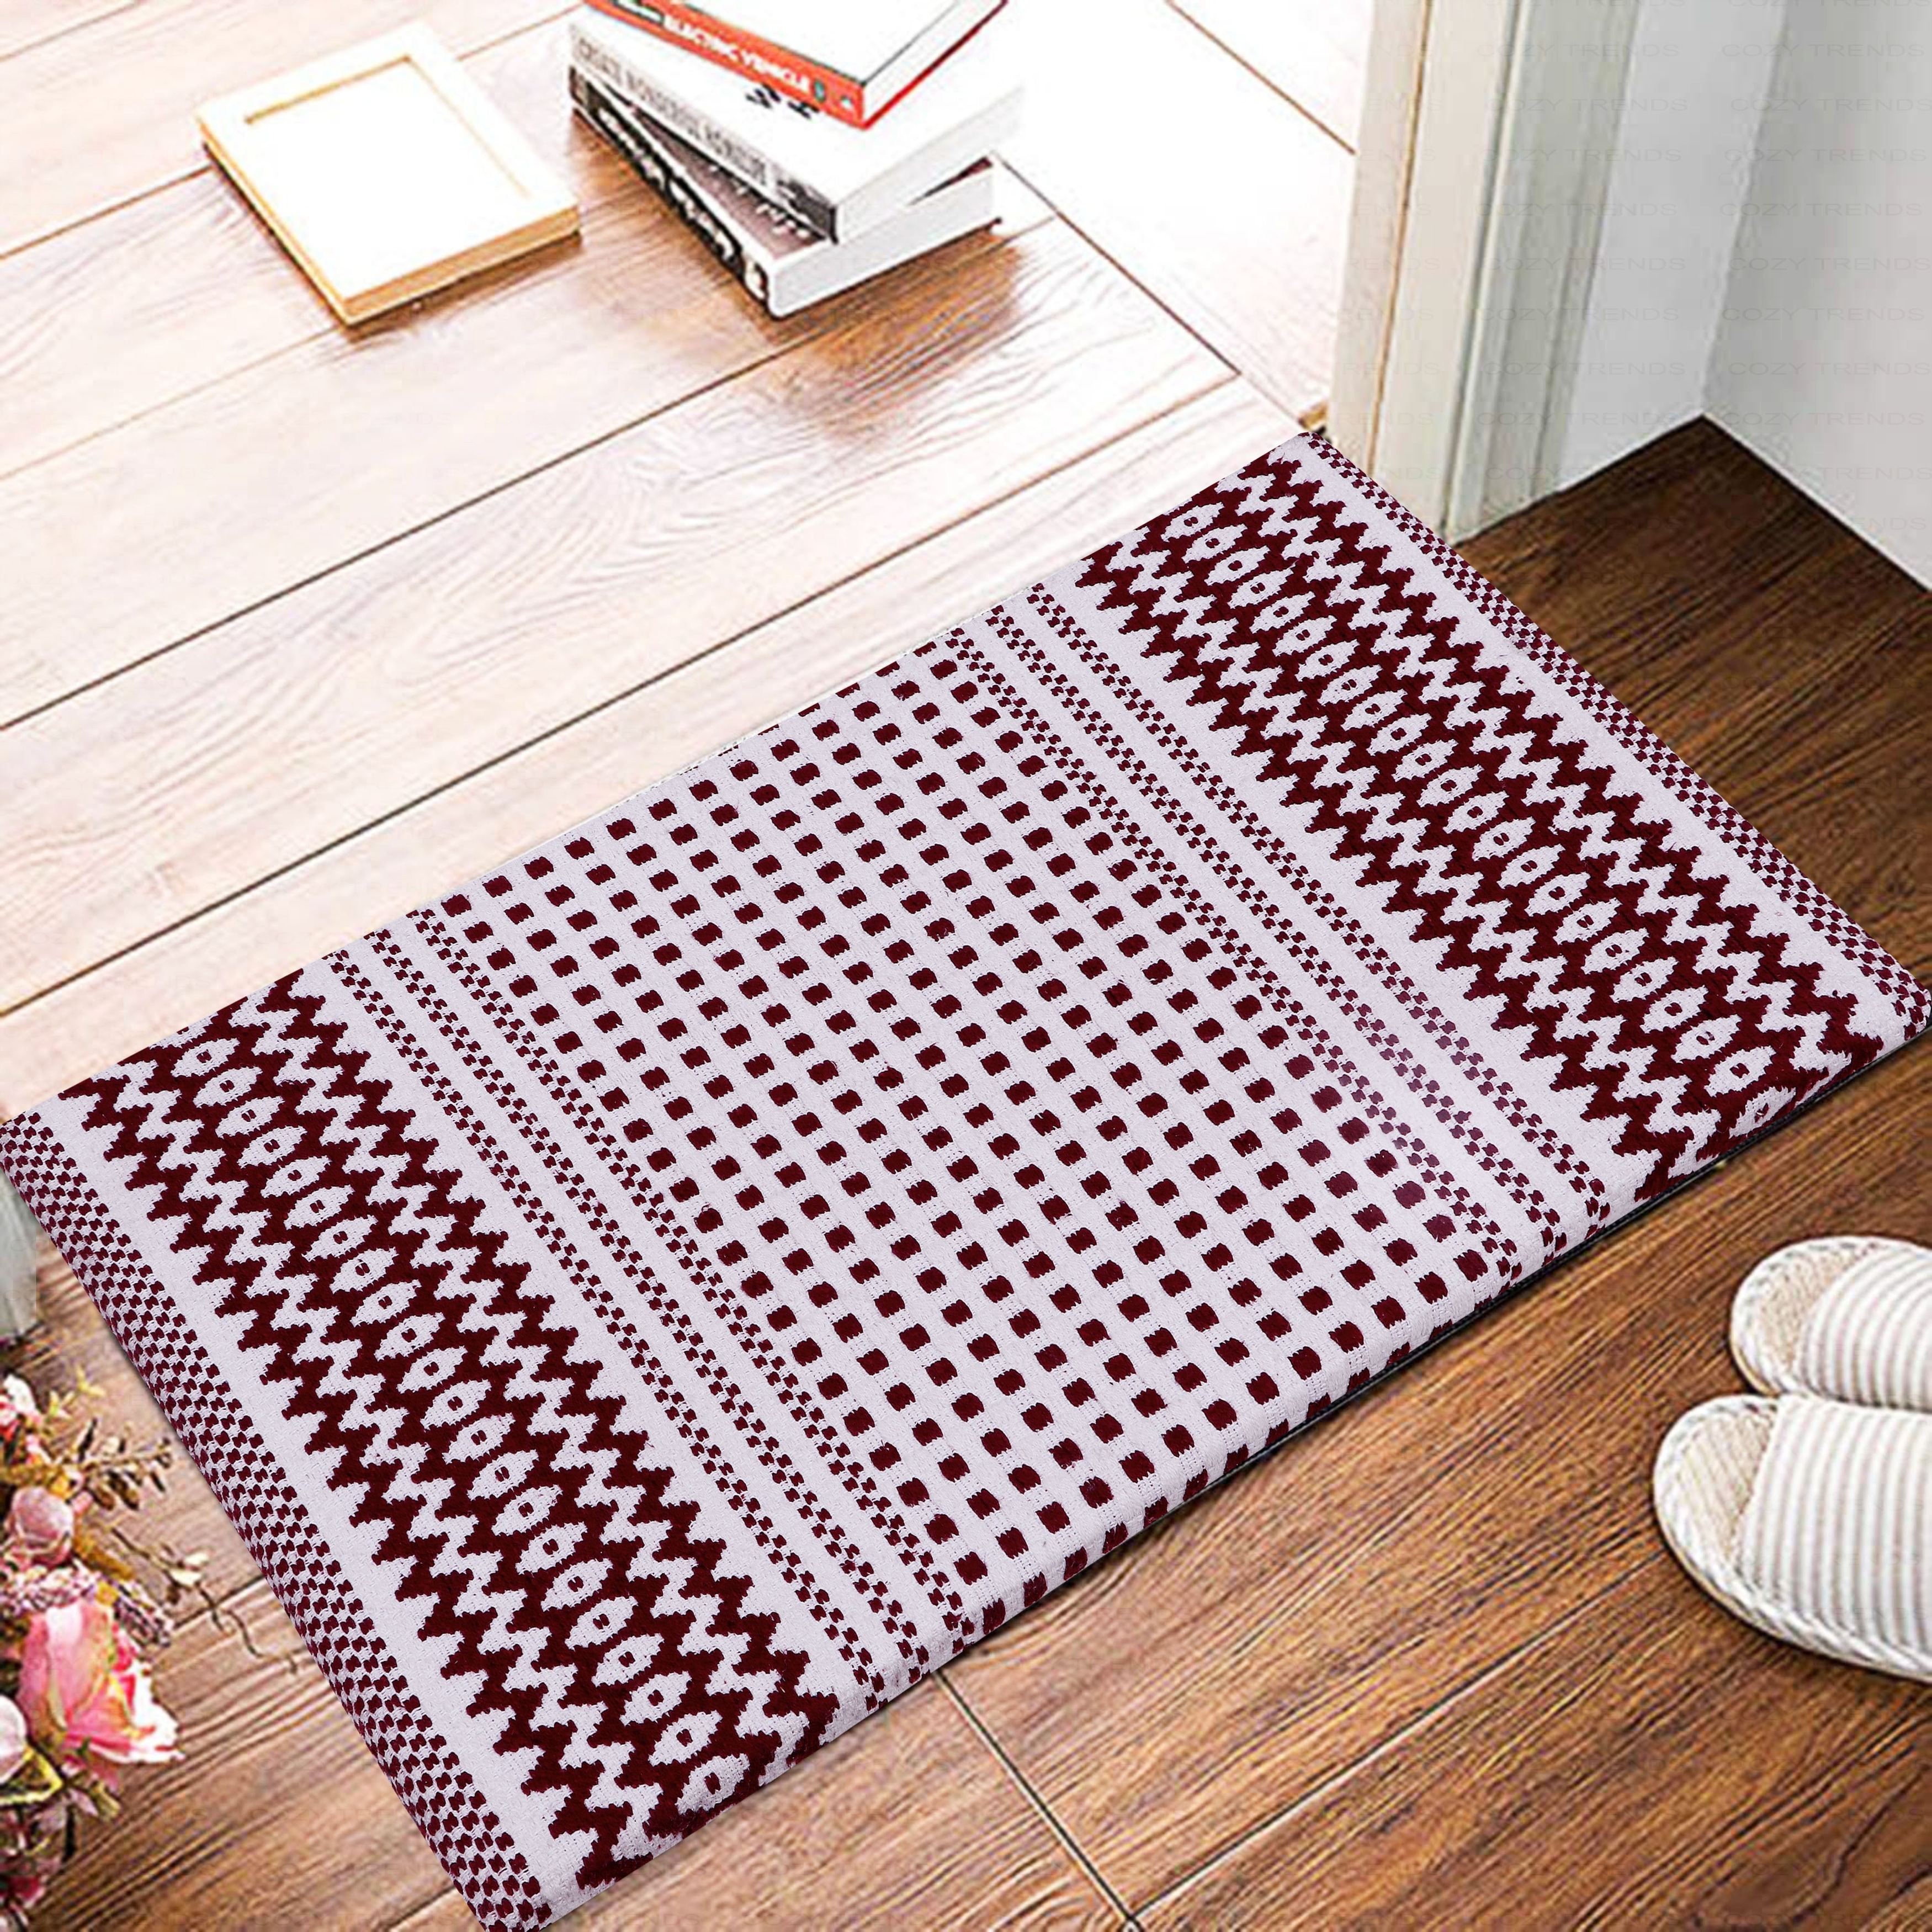 Embossed Kitchen Mats Cushioned Anti Fatigue, Non-Slip Leather-Like Kitchen  Floor Mat, Eco-Friendly PVC Foam, Waterproof Anti-Fatigue Mat for Kitchen,  Office, Sink, Laundry, 18 W 30 L, Burgundy 